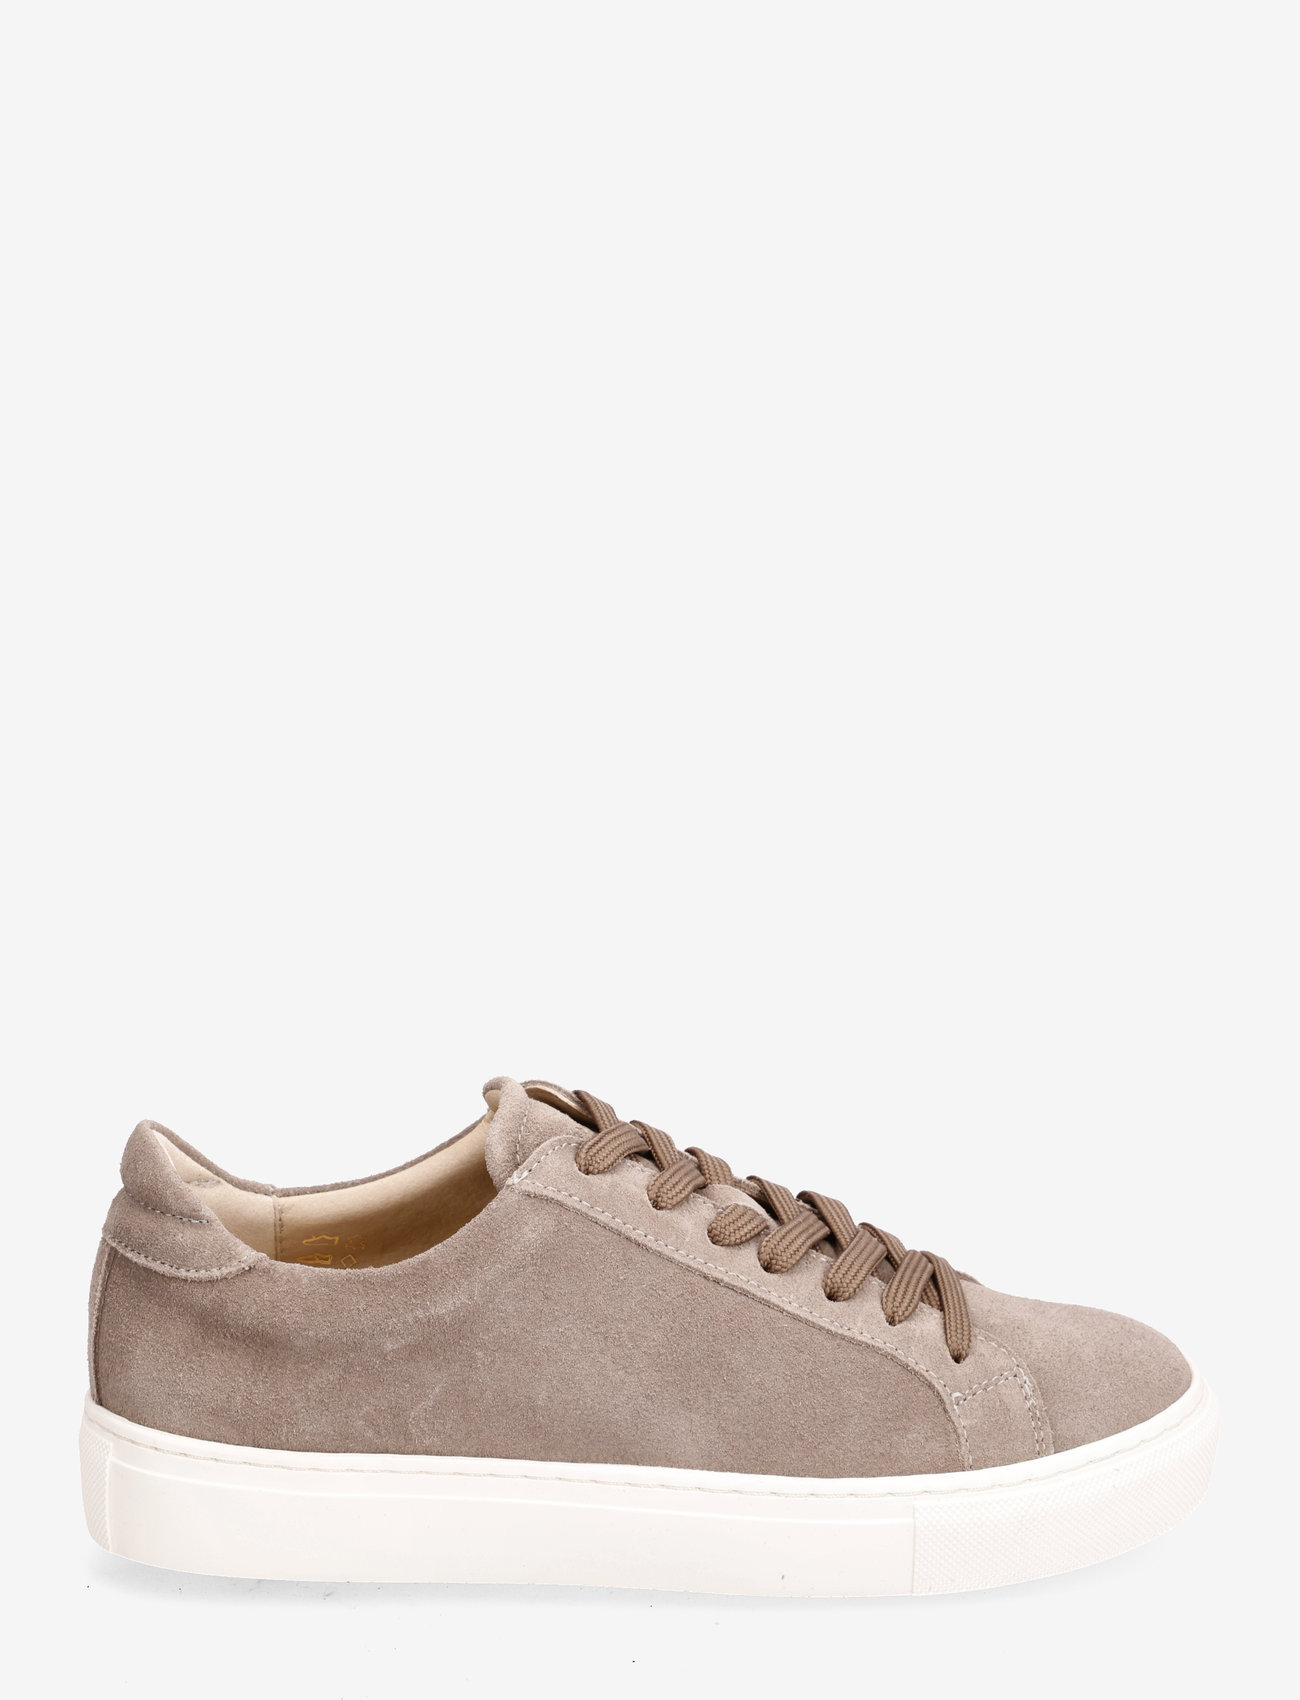 Garment Project - Type - Ardesia Suede - sneakers med lavt skaft - ardesia - 1